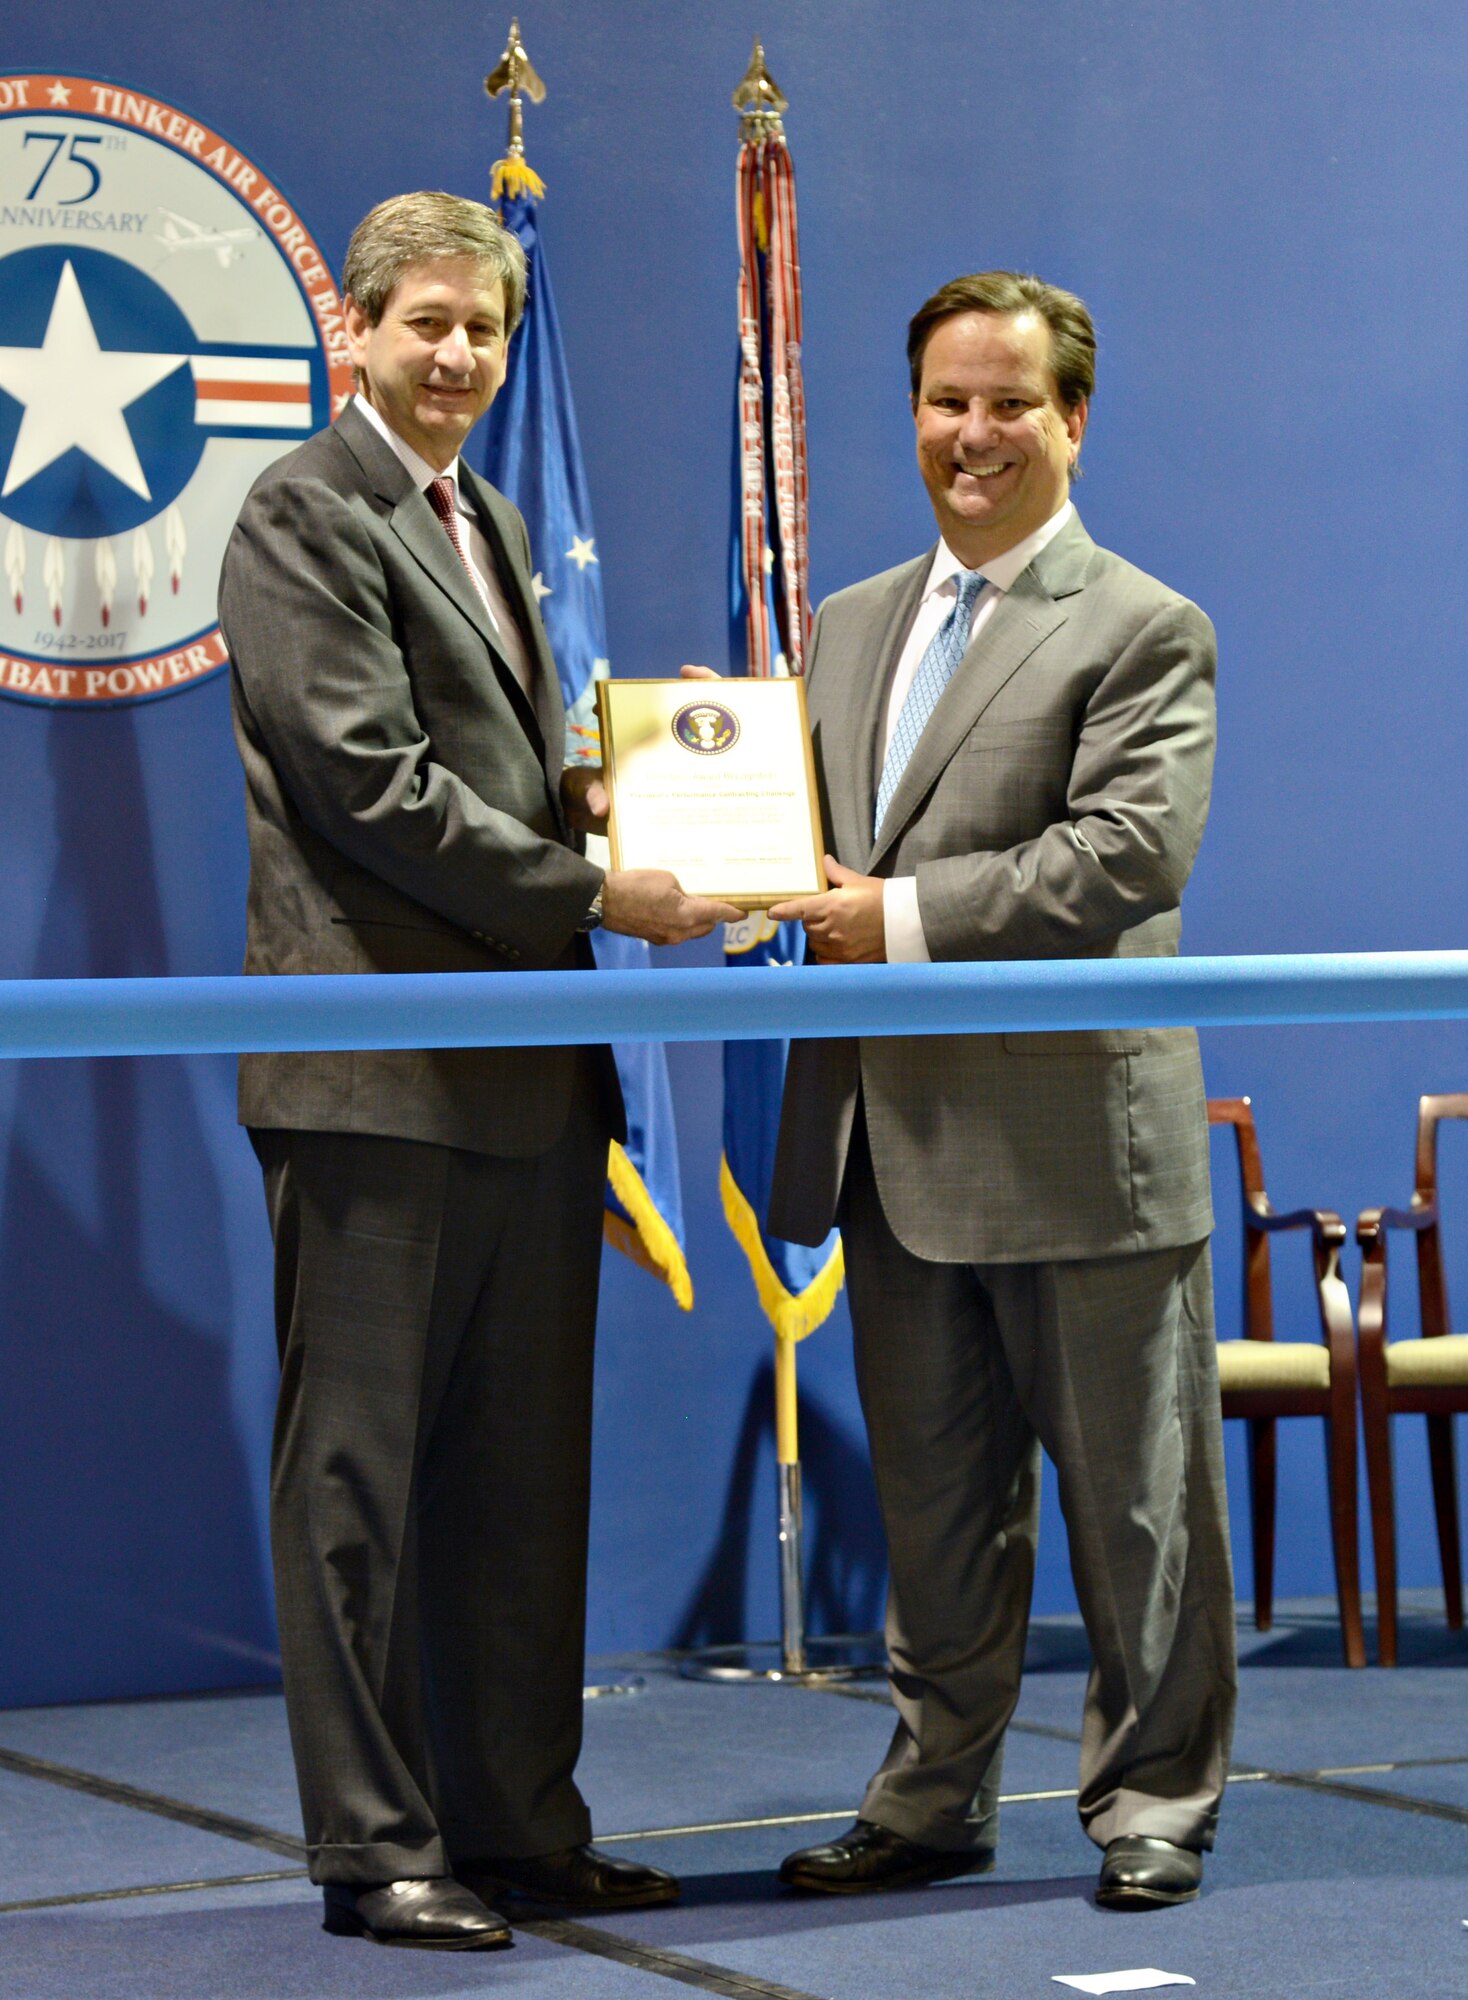 Mark Correll, deputy assistant secretary of the Air Force for Environment, Safety and Infrastructure, presents Wade Wolfe, vice director for the Oklahoma City Air Logistics Complex, with a Directors’ Award Recognition for the President’s Performance Contracting Challenge award for the OC-ALC’s efforts to achieve or exceed its target toward the President’s 2016 goal of $4 billion in energy and water efficiency investments. In 2011 and 2014, President Barack Obama challenged federal agencies to facilitate a total of $4 billion in energy efficiency upgrades to federal buildings with energy efficient performance contracts through 2016. As of December 2016, the agencies exceeded that goal, resulting in “21 federal agencies awarding 340 projects with over $4.2 billion in value,” according to a White House announcement. (Courtesy photo)